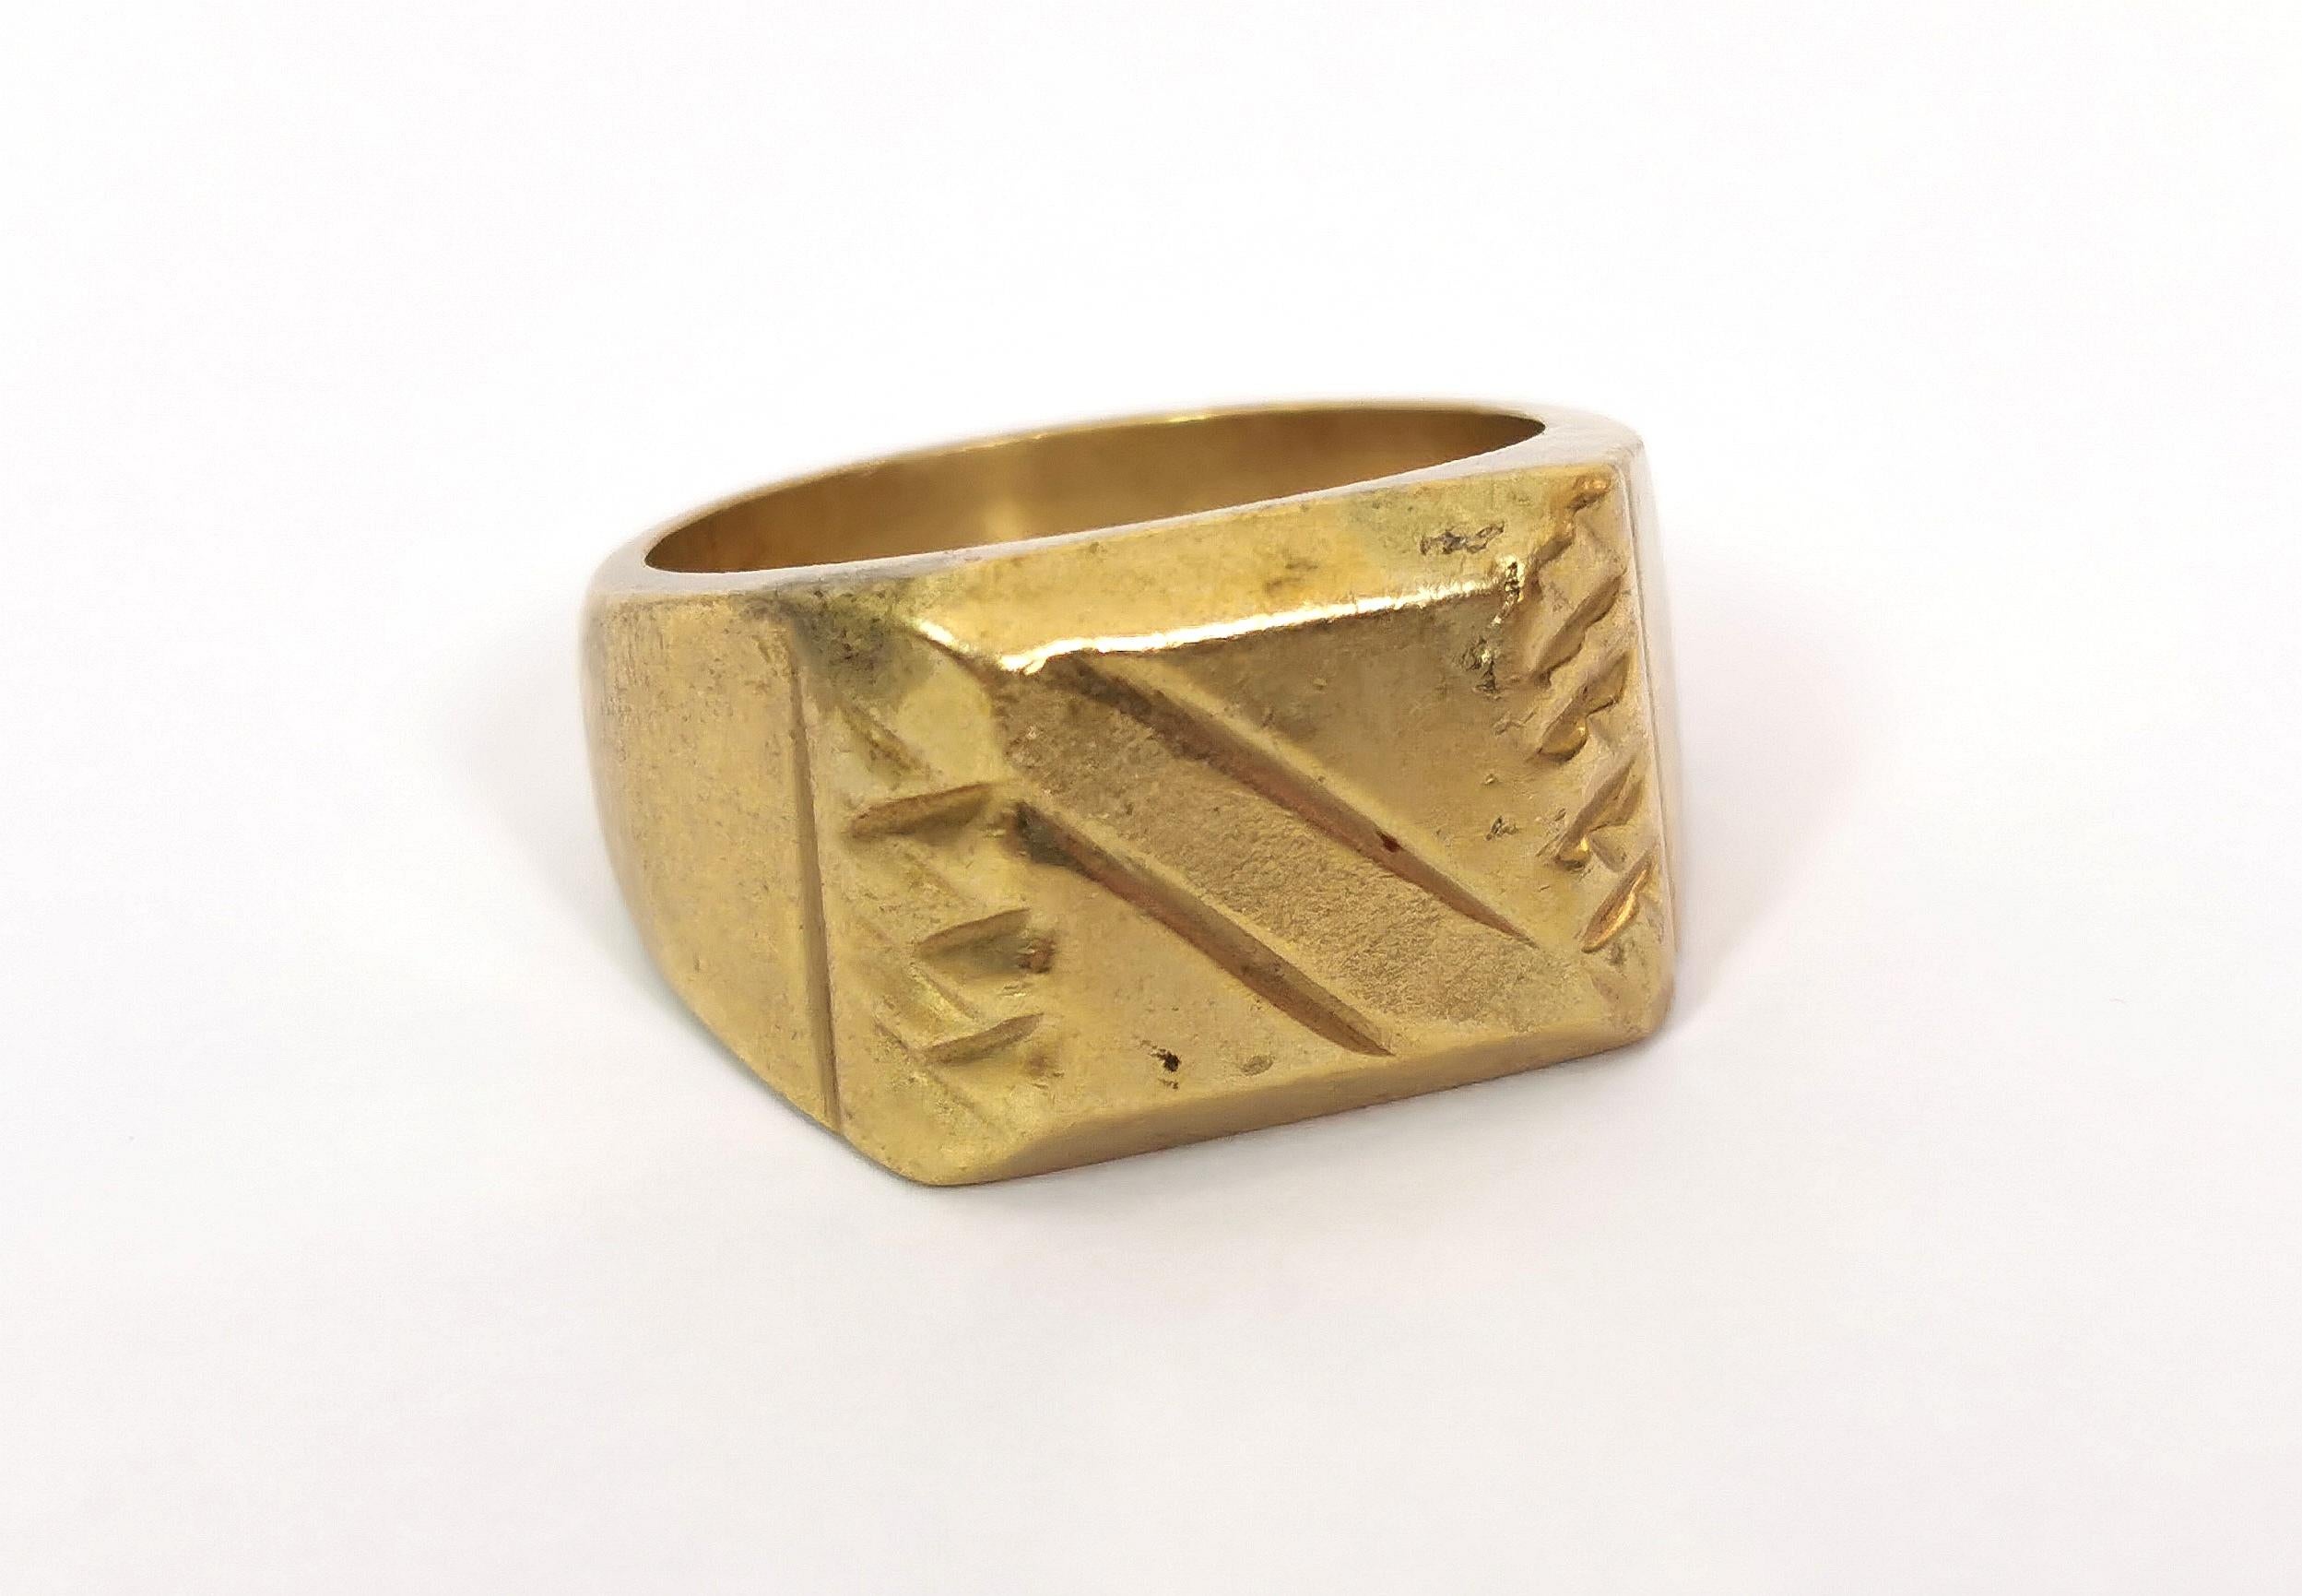 Retro Vintage 18k gold plated signet ring, c1970s